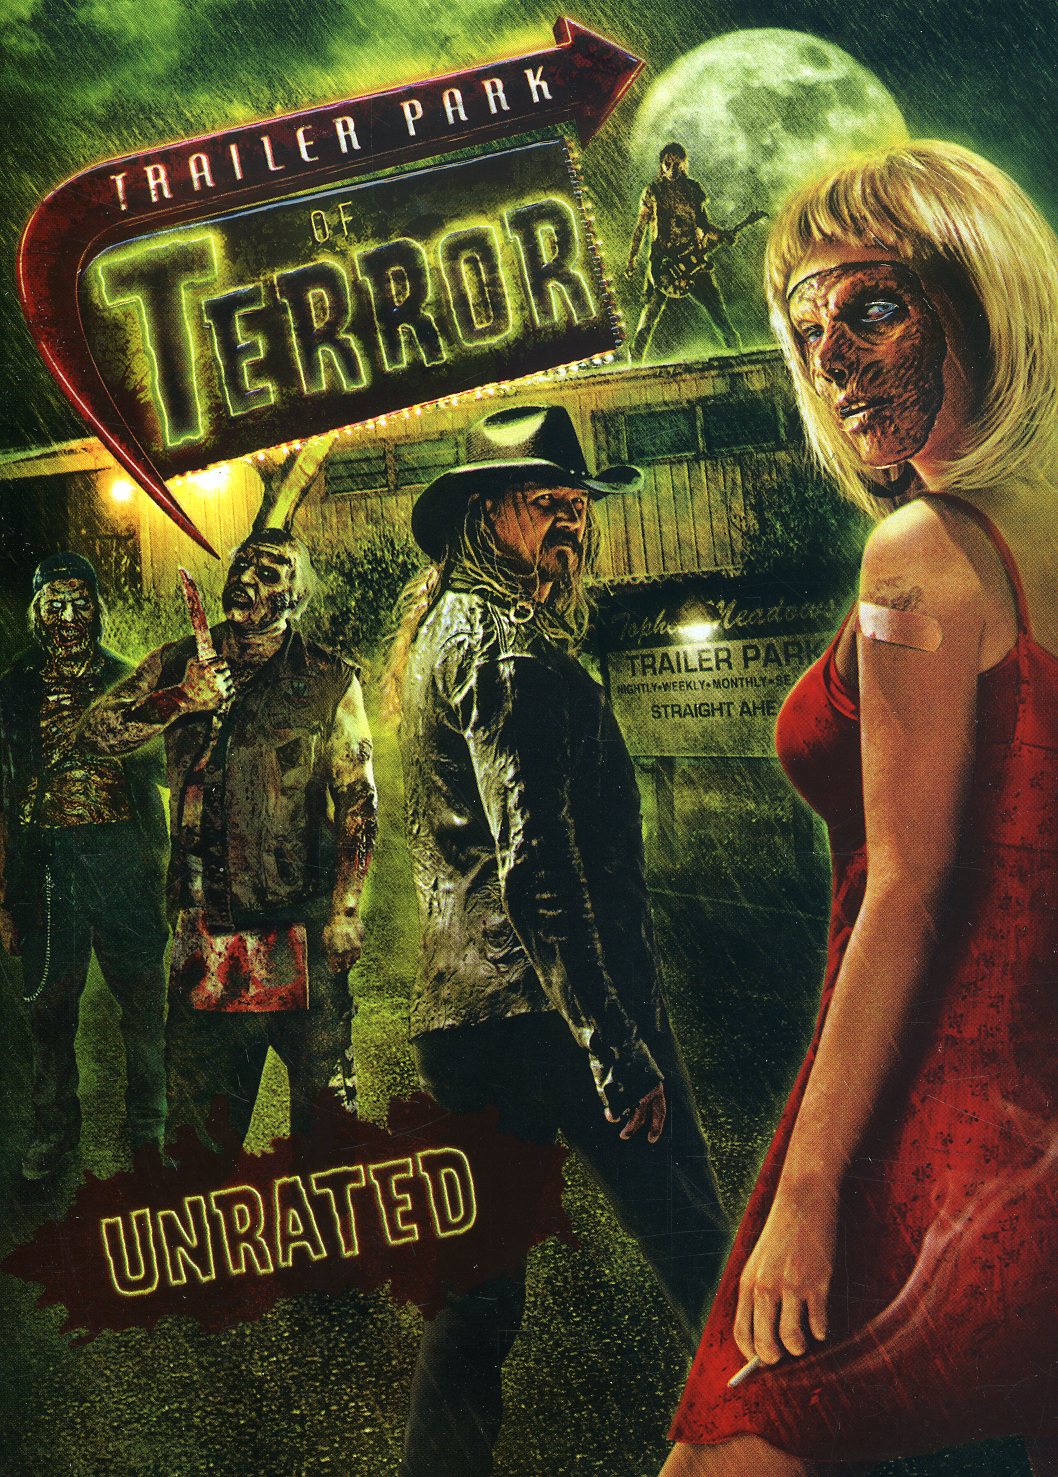 TRAILER PARK OF TERROR (RATED) (UNRATED) / (AC3)